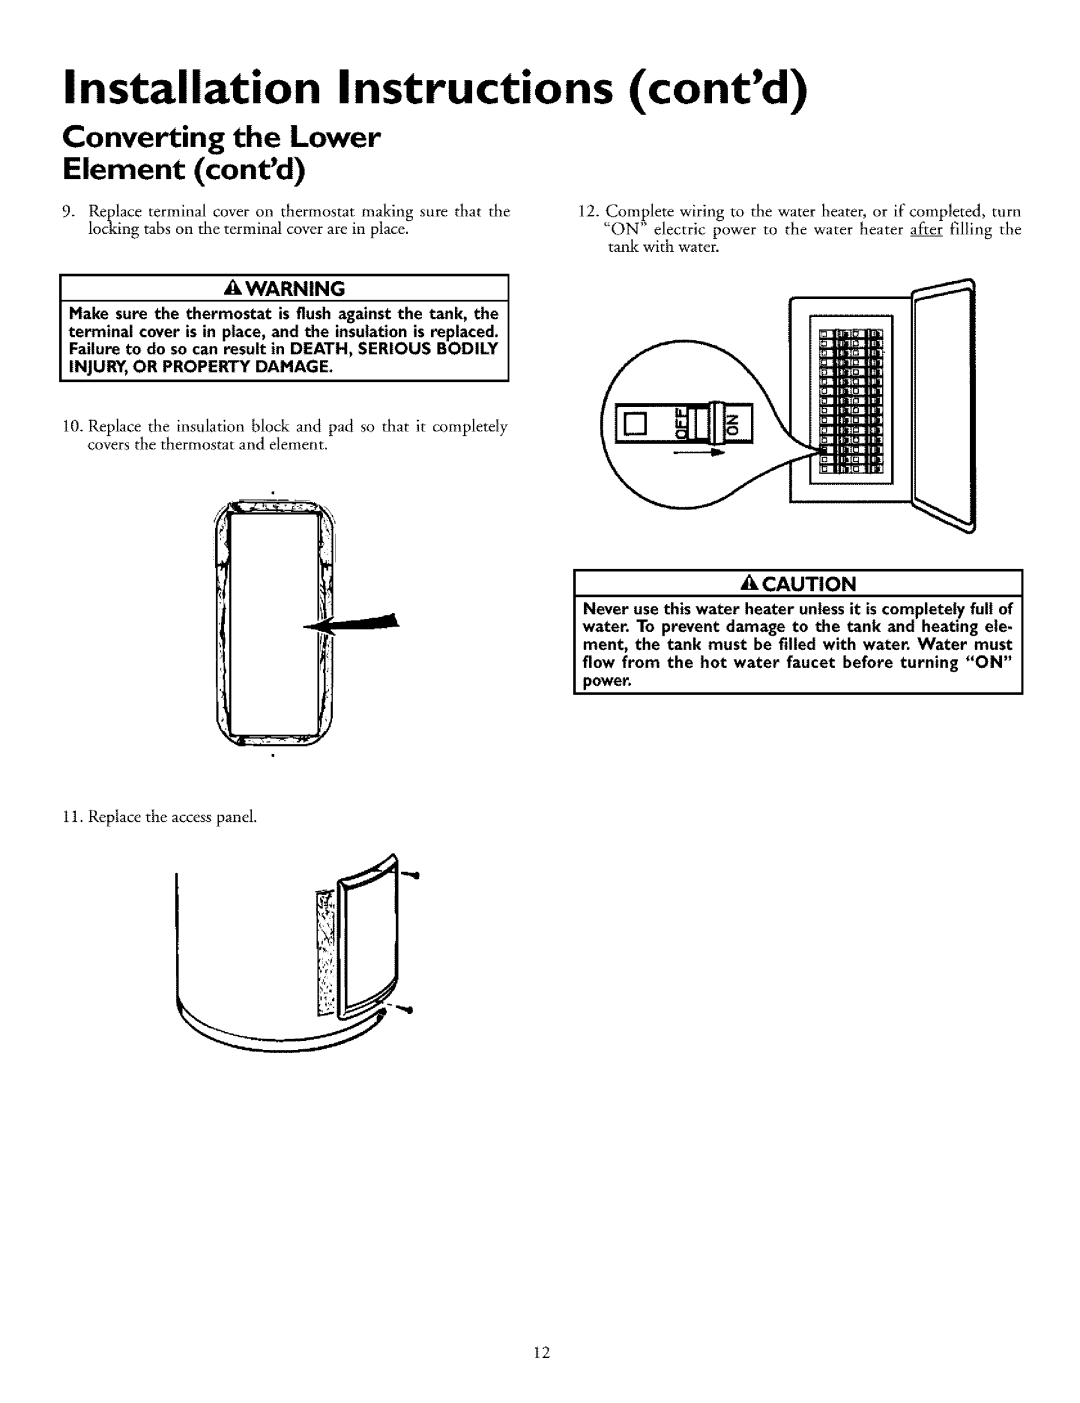 Kenmore 153.326761 Installation Instructions contd, Converting the Lower Element contd, Replace the access panel 